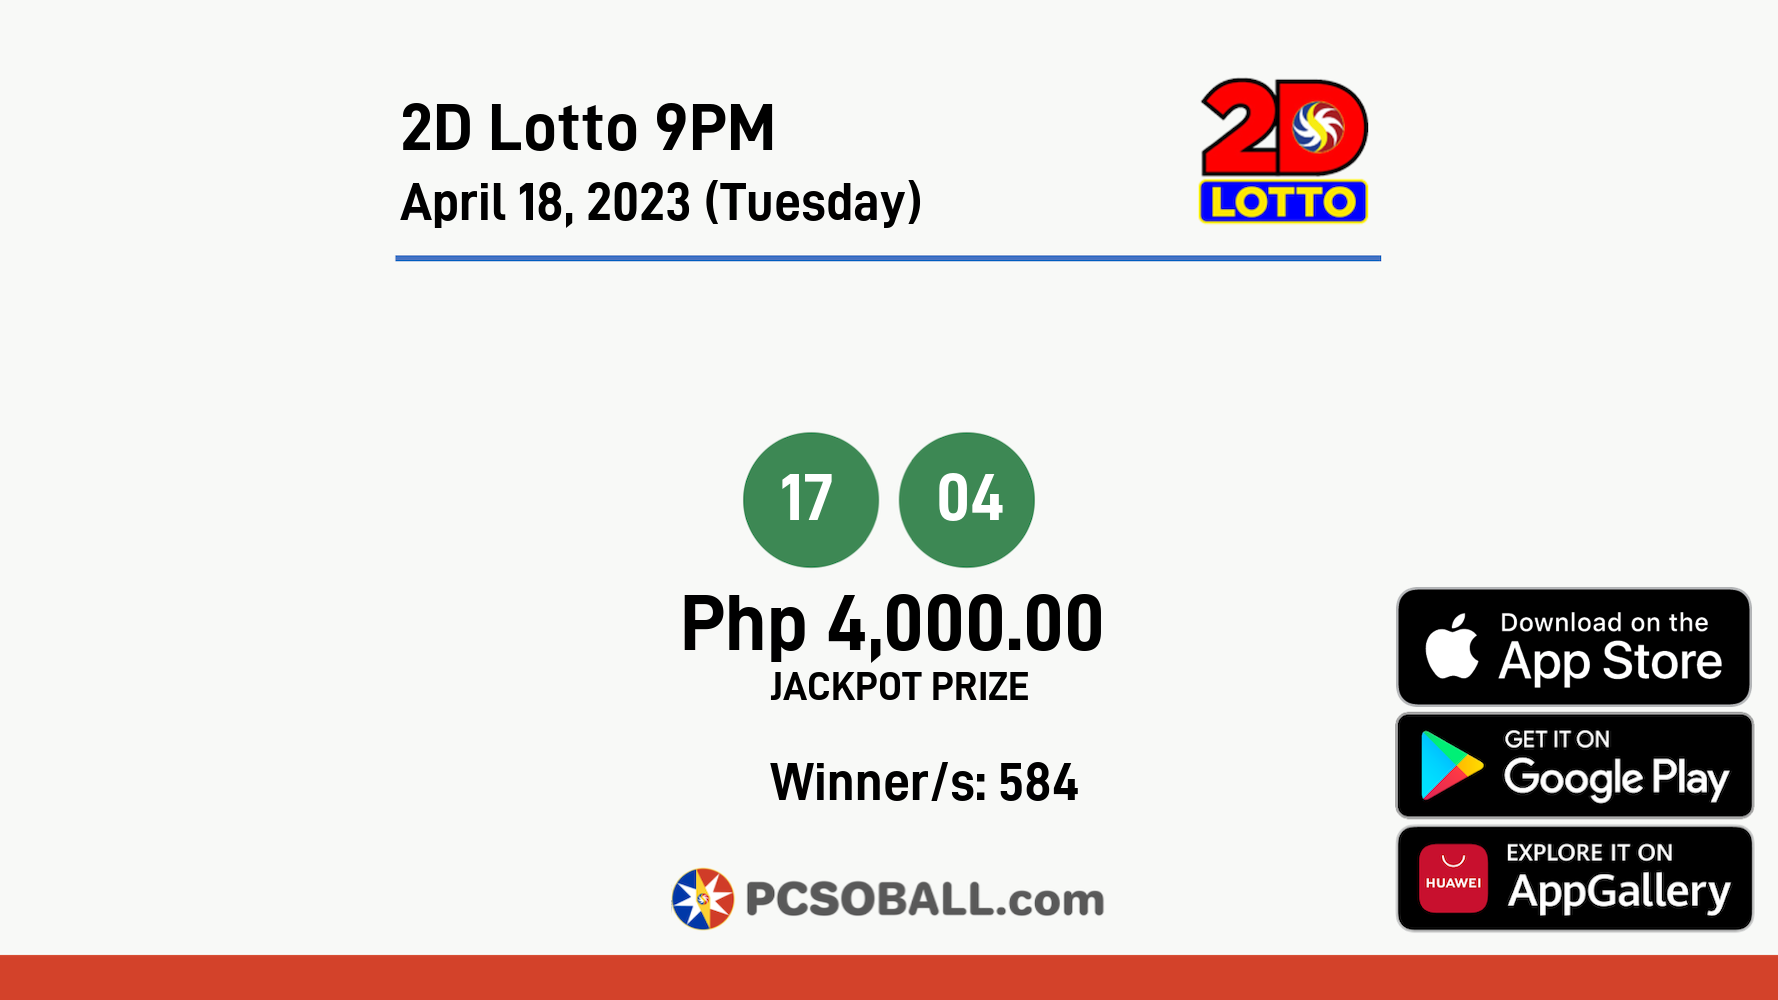 2D Lotto 9PM April 18, 2023 (Tuesday) Result